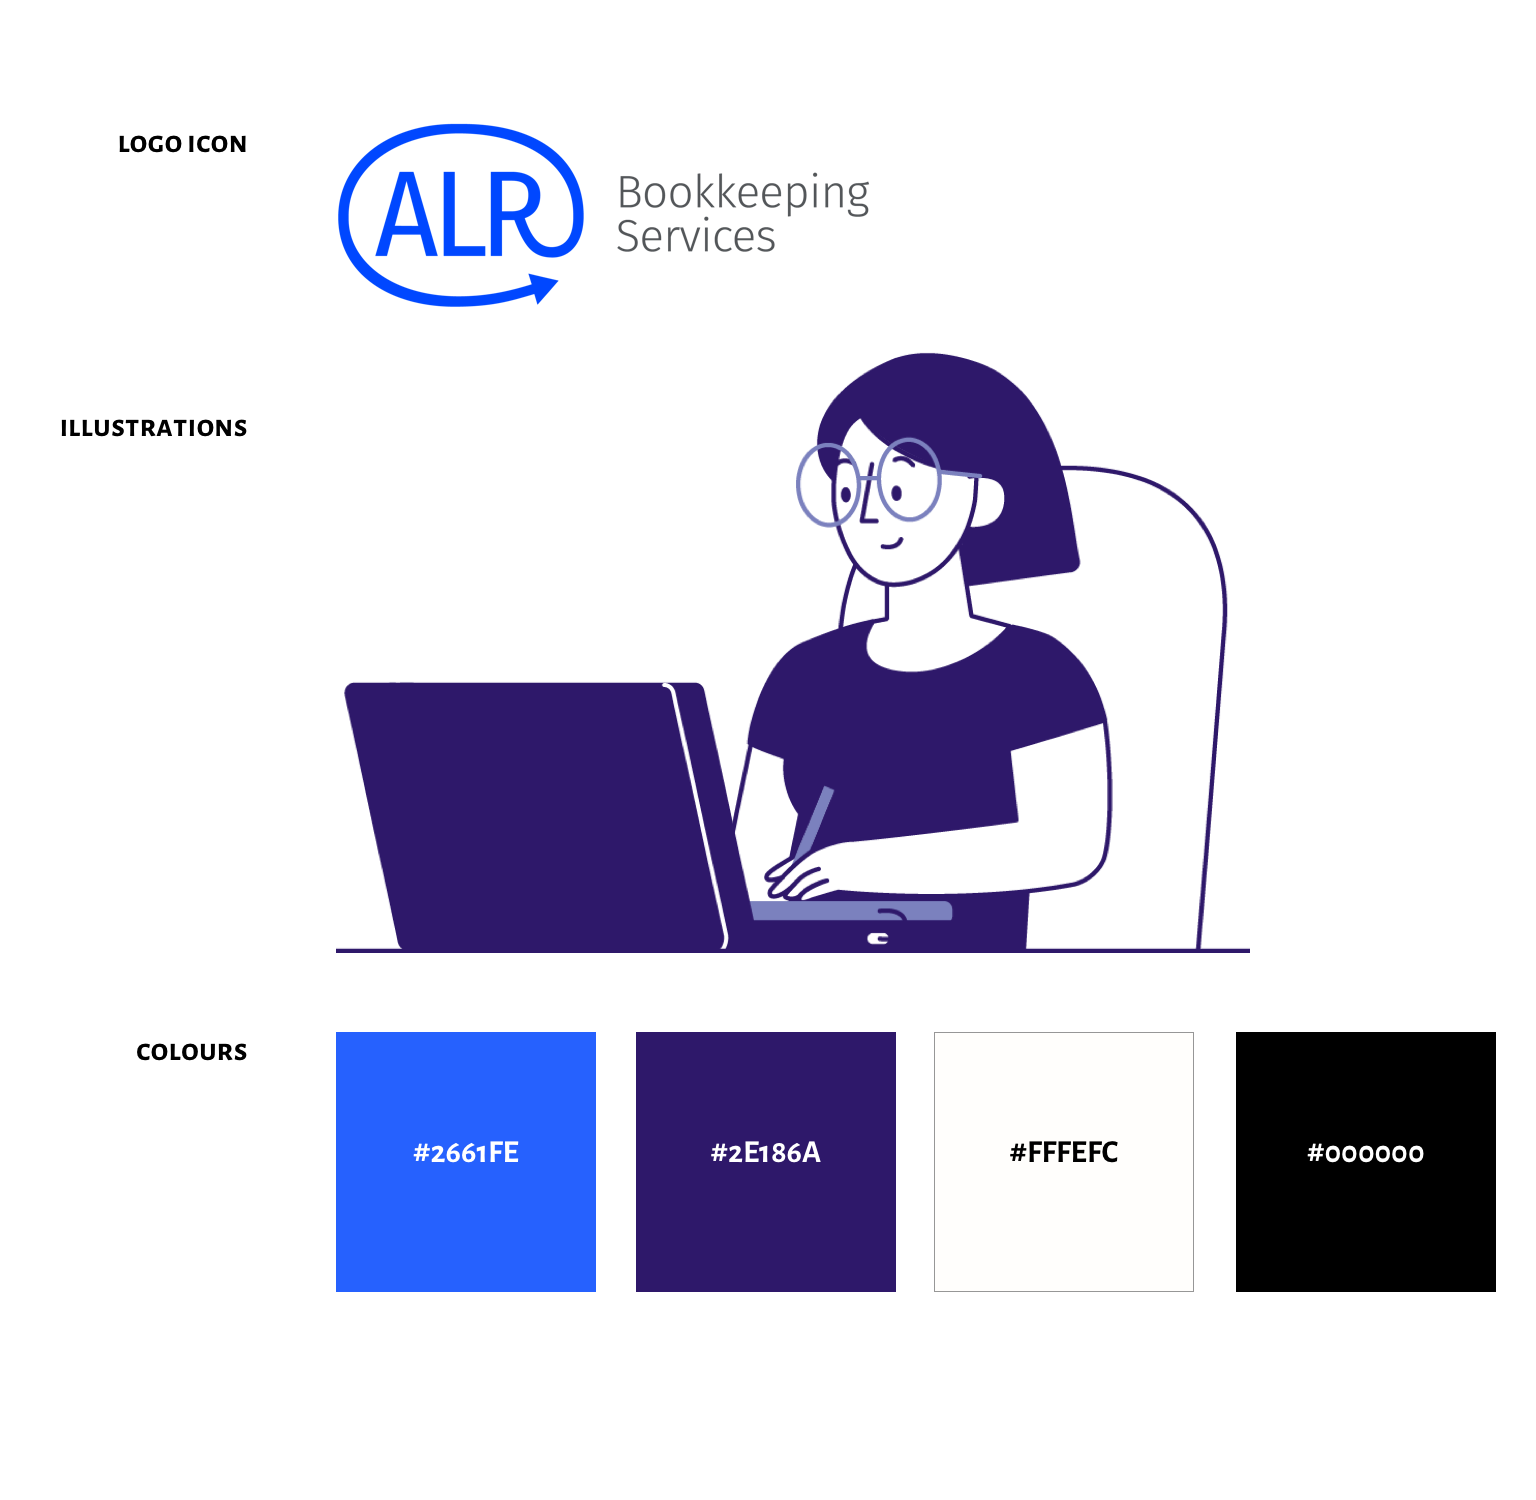 The colour and imagery palette for ALR Bookkeeping's branding